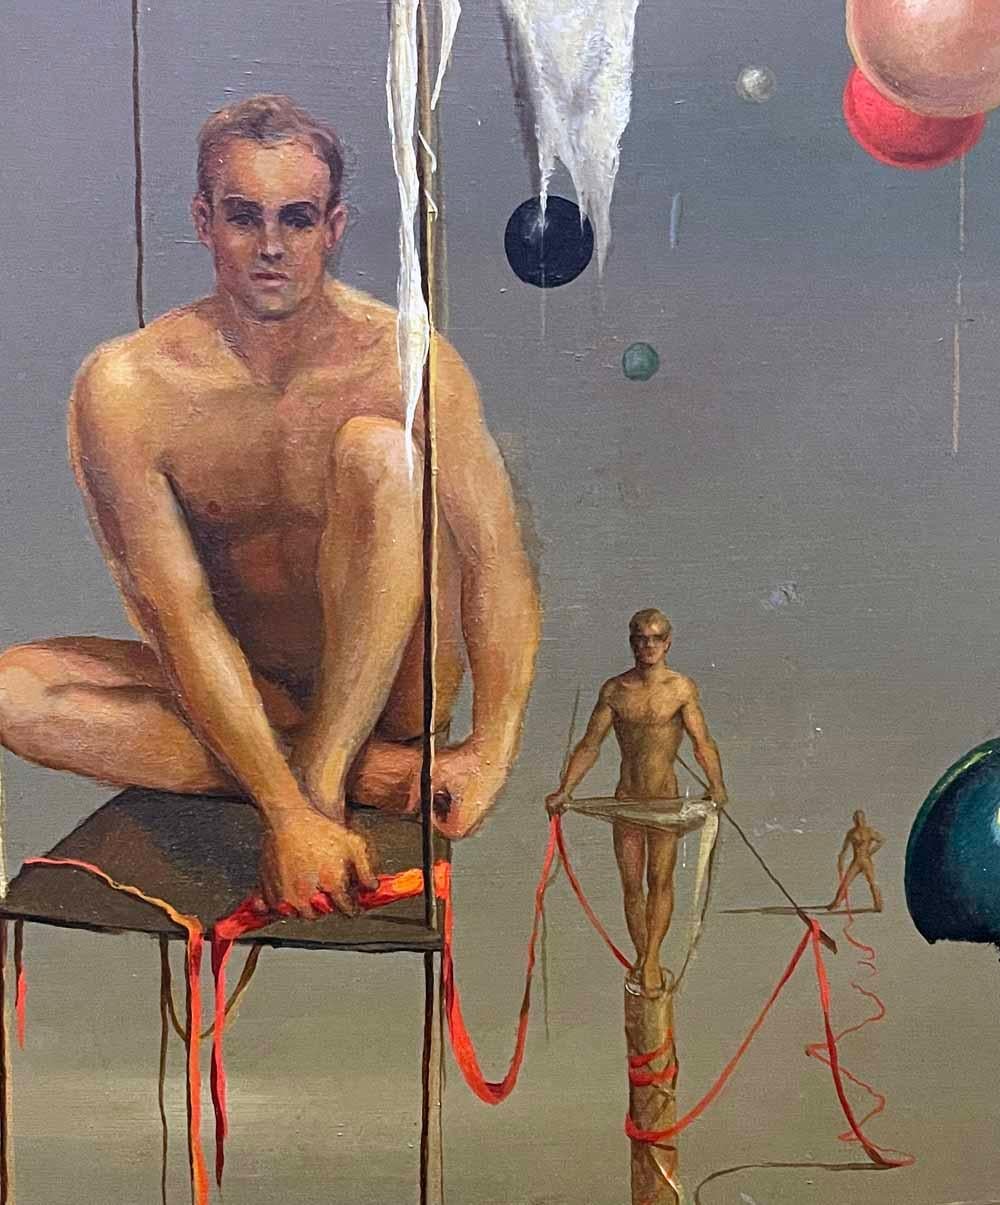 One of the finest, and certainly the earliest painting by John Lear that we have seen or offered, this image depicts three male nude figures connected by a trailing line of red ribbon and framed by a series of orbs floating in the air.  Like much of